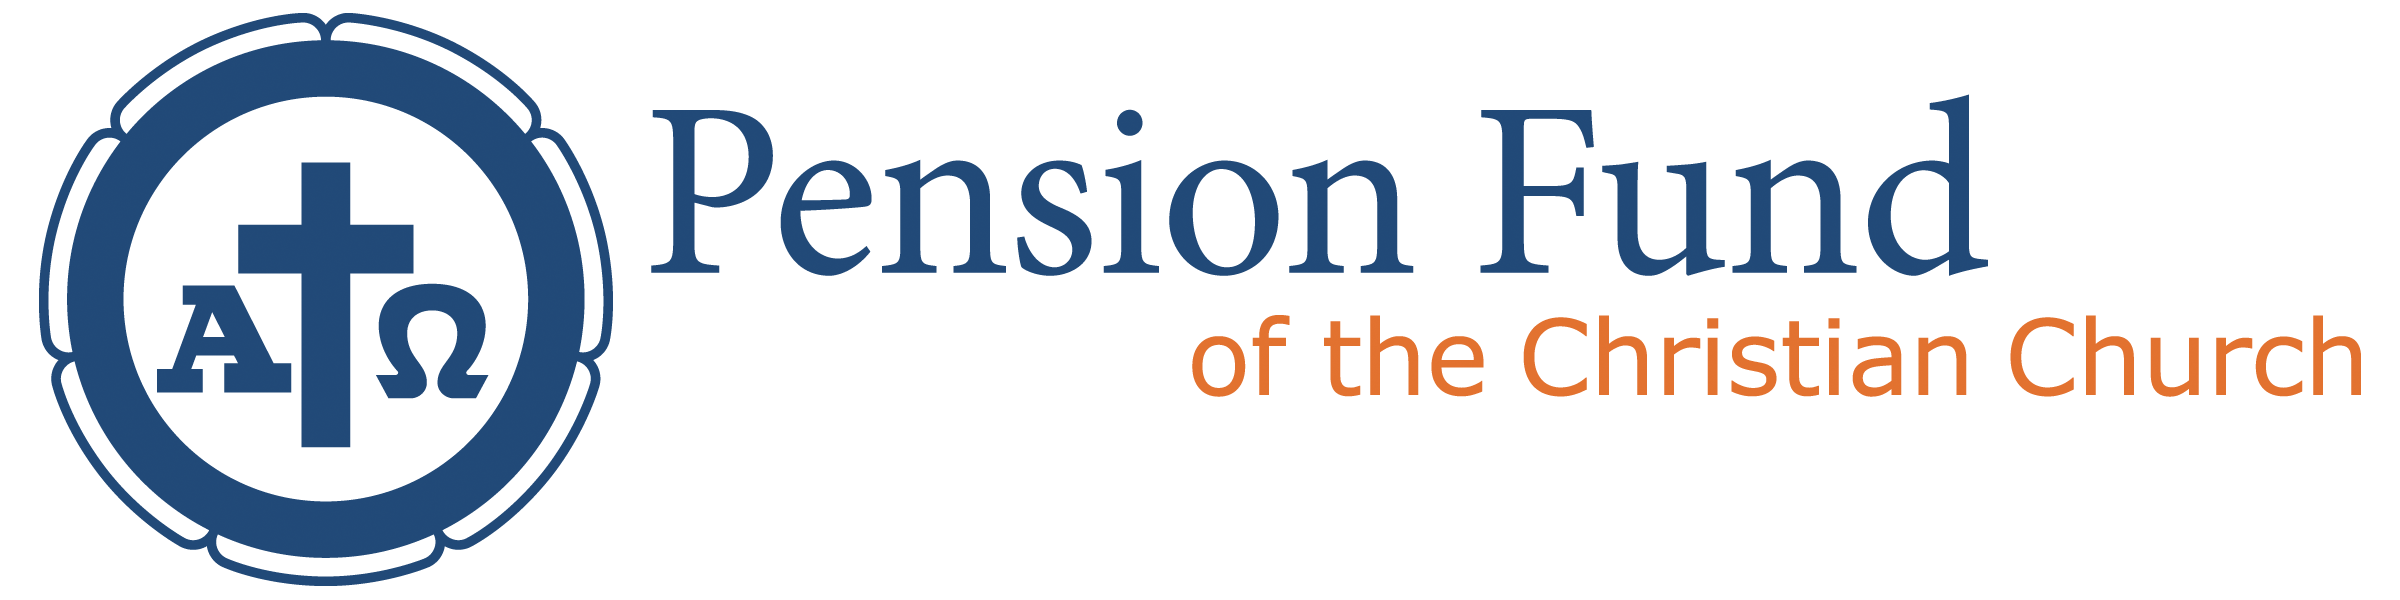 Pension Fund of the Christian Church logo